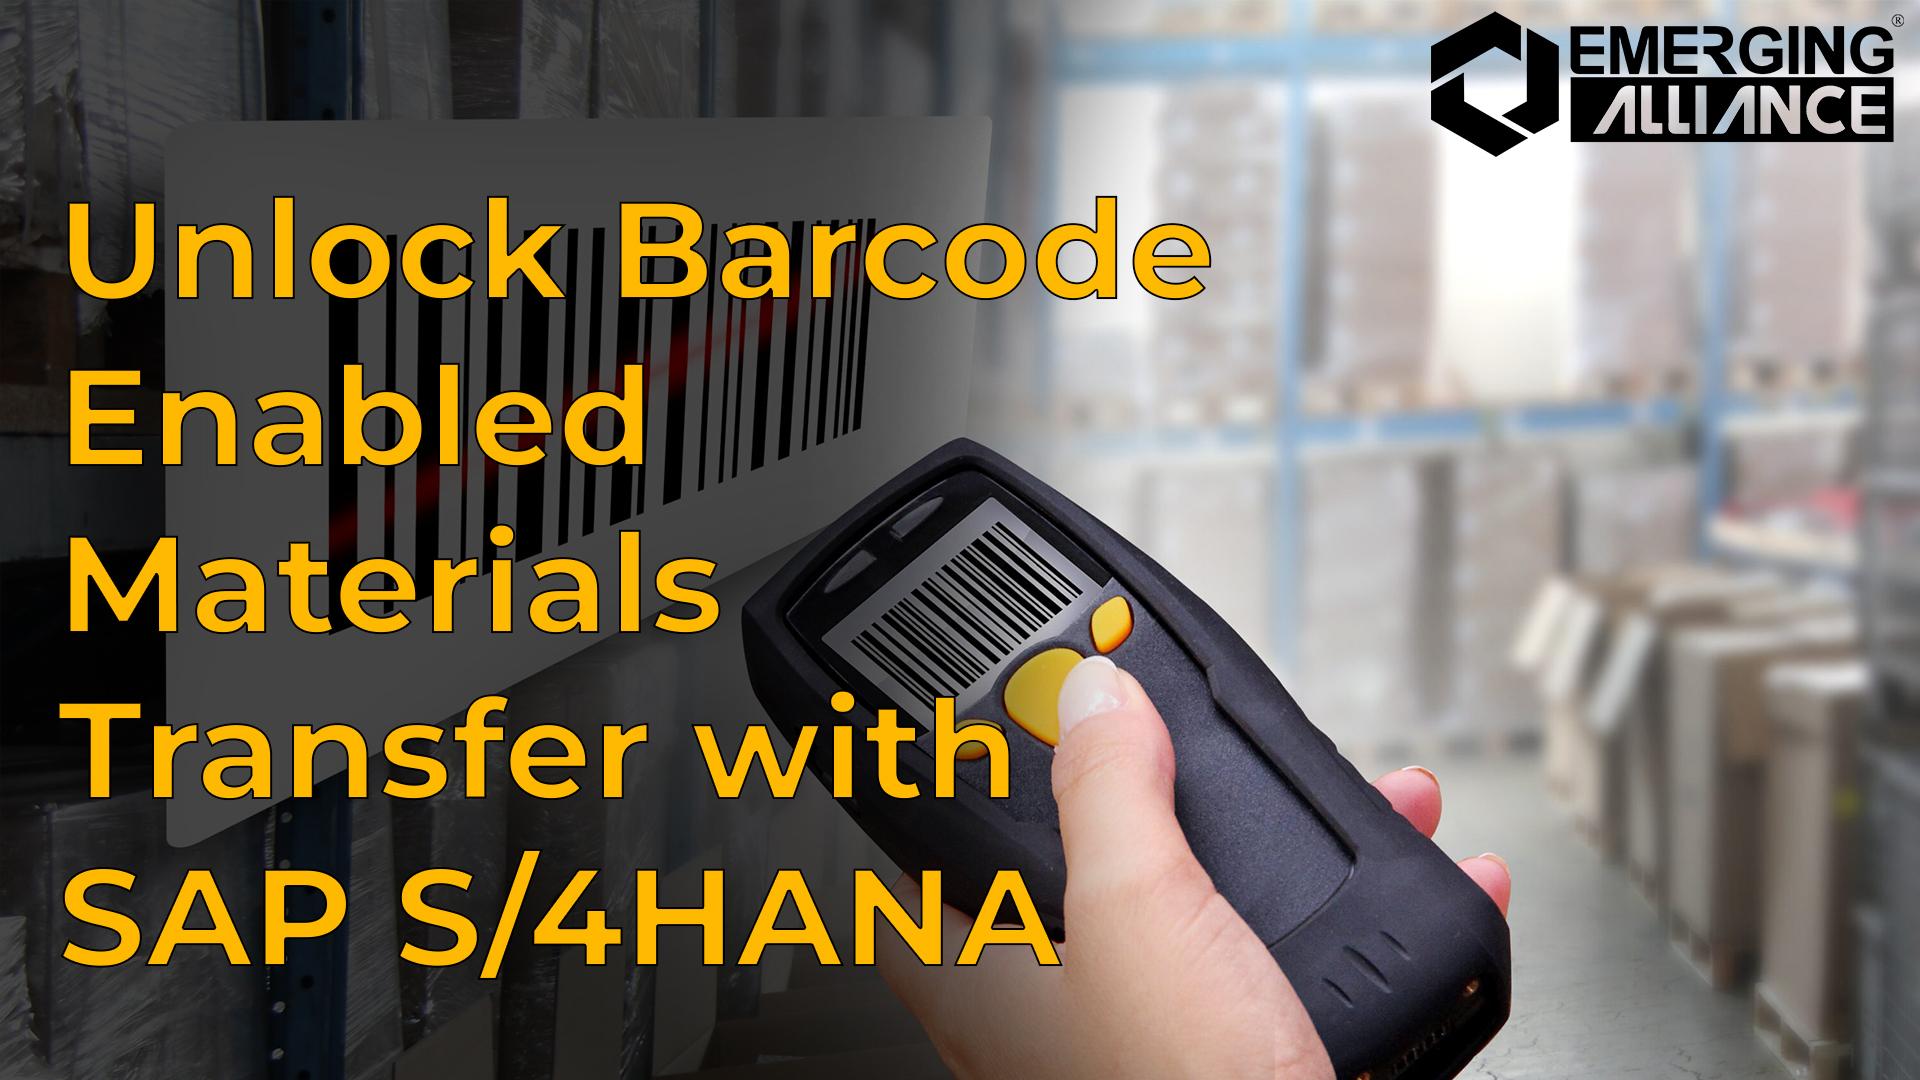 Barcode Enabled Materials Transfer with SAP S4HANA